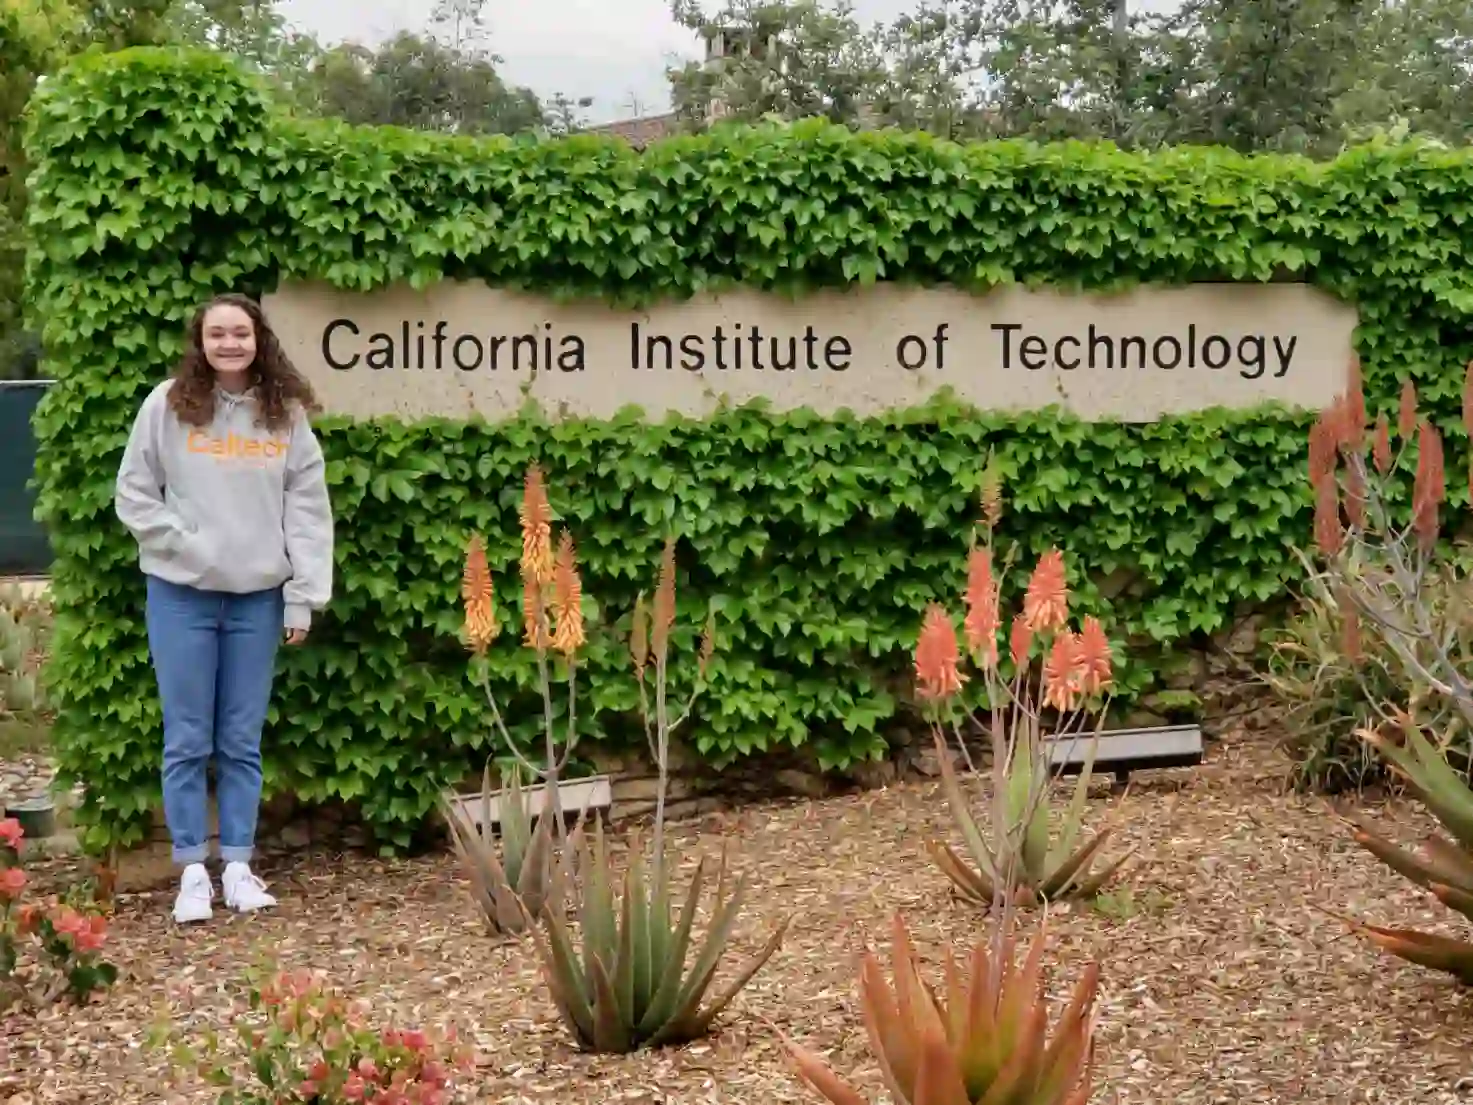 How California Institute of Technology is Revolutionizing the Future!